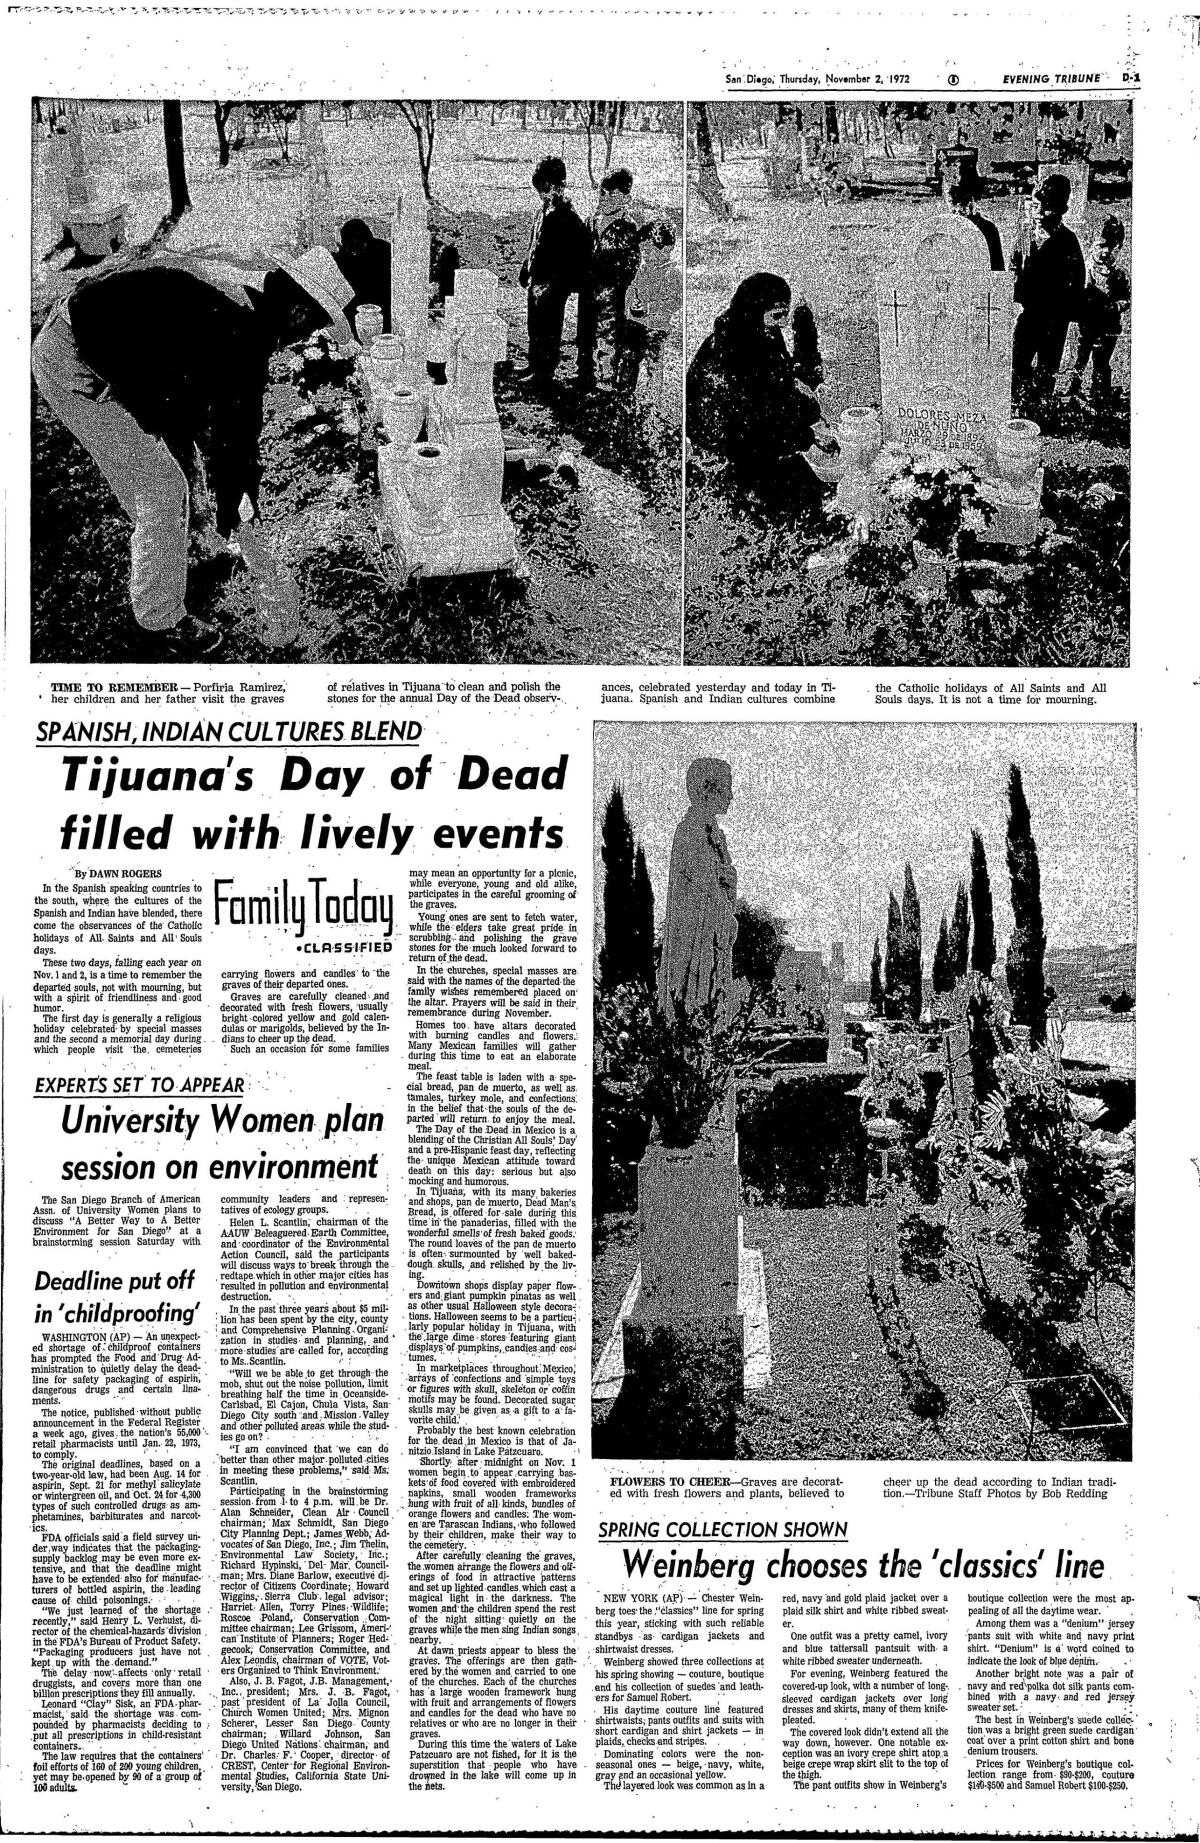 A page from the Evening Tribune, Nov. 2, 1972 features a story on Tijuana's Day of Dead.